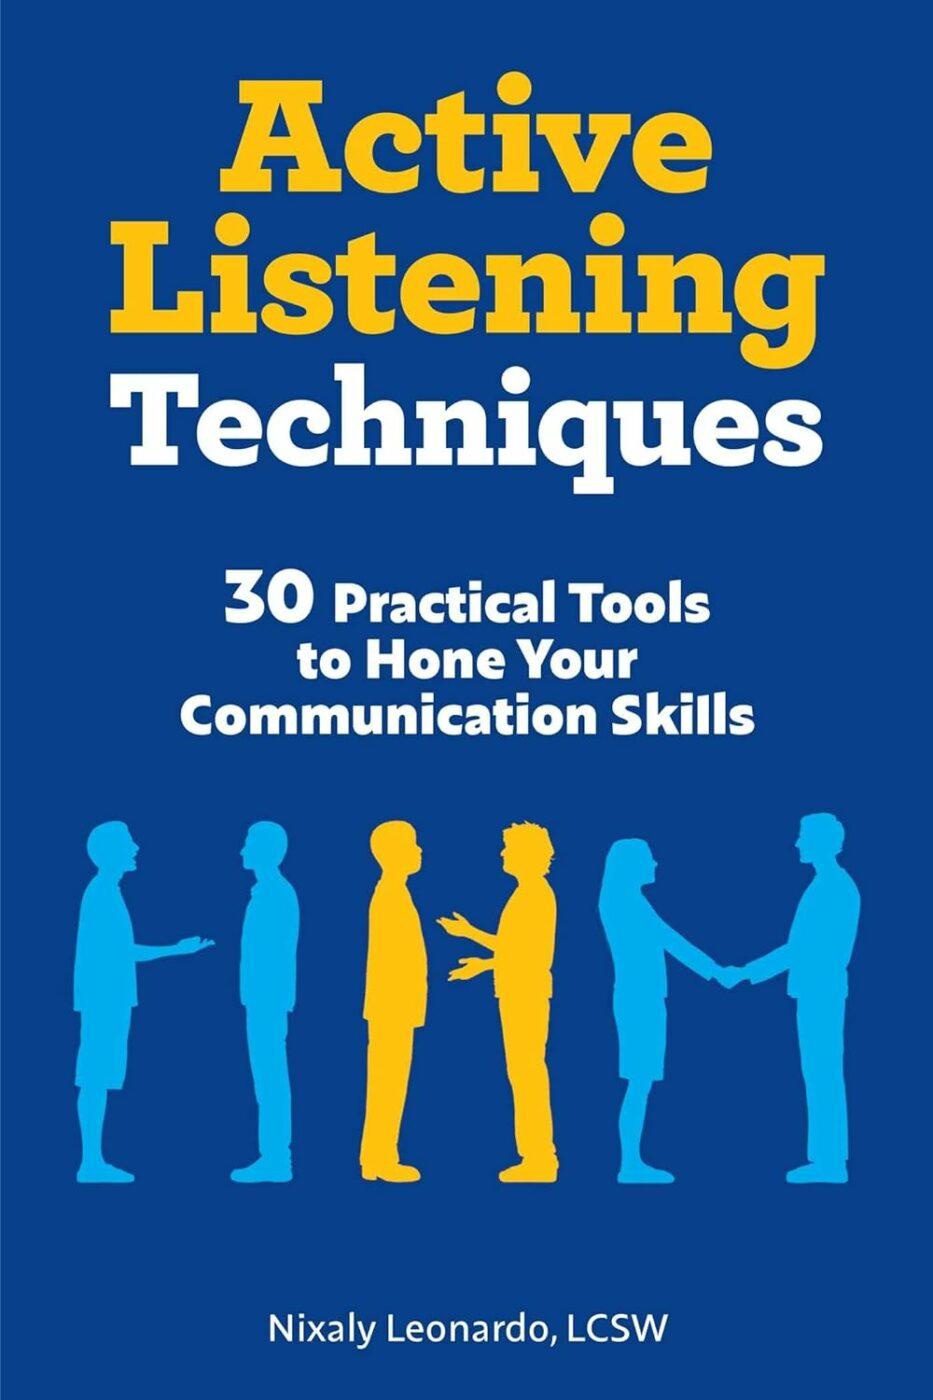 Active Listening Techniques by Nixaly Leonardo is another one of our favorite communication skills books